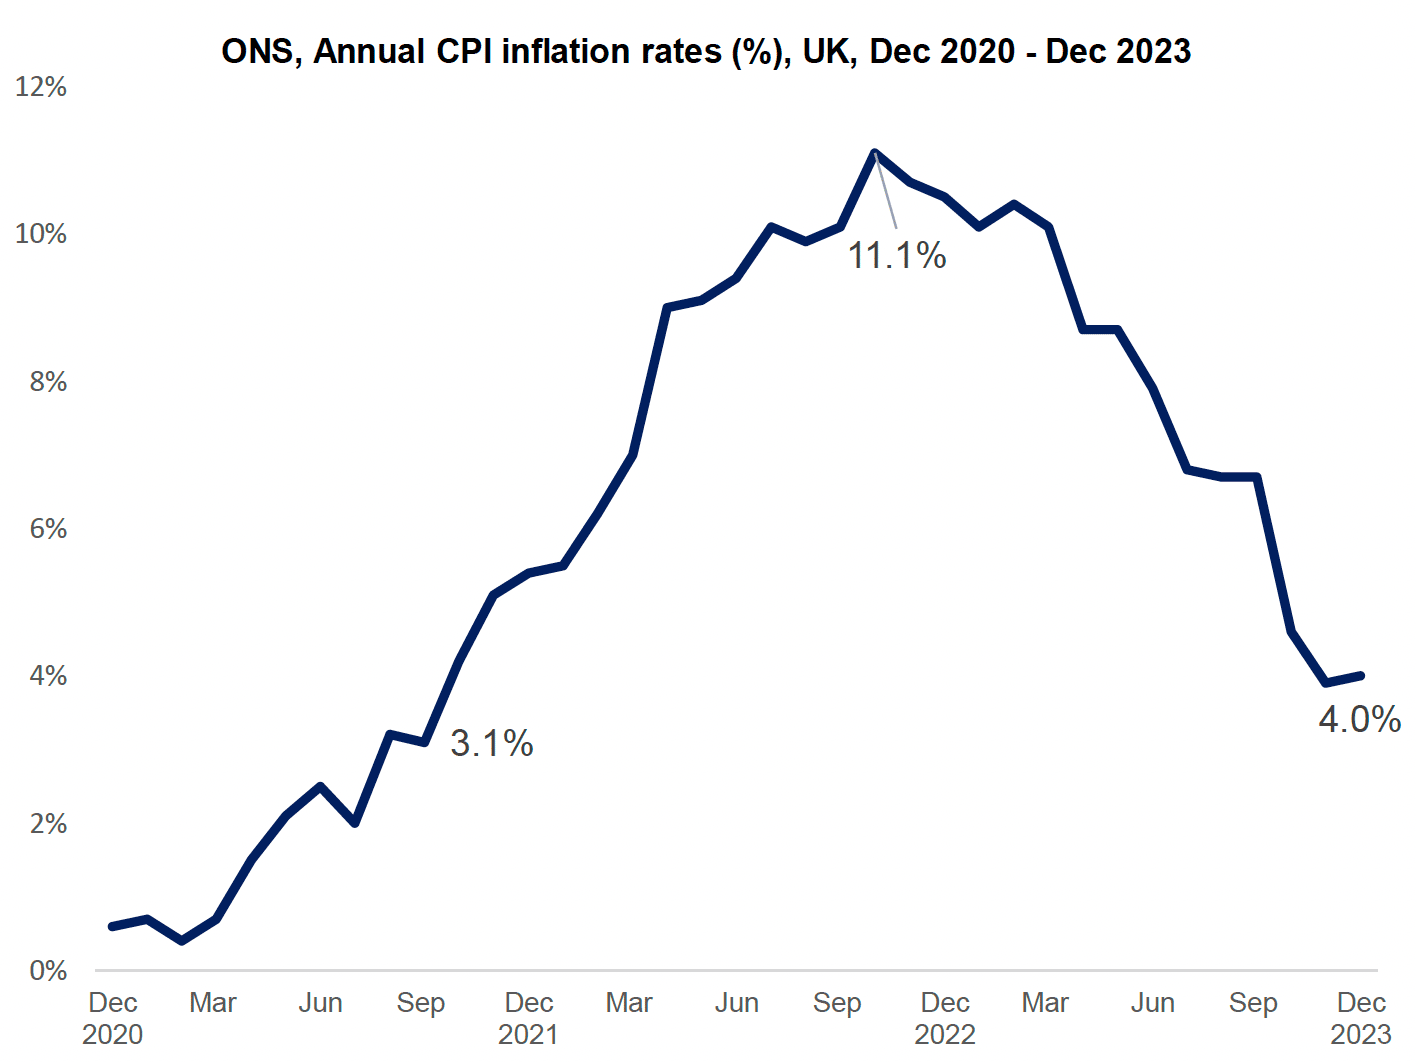 A line chart showing annual CPI inflation rates between December 2020 and December 2023